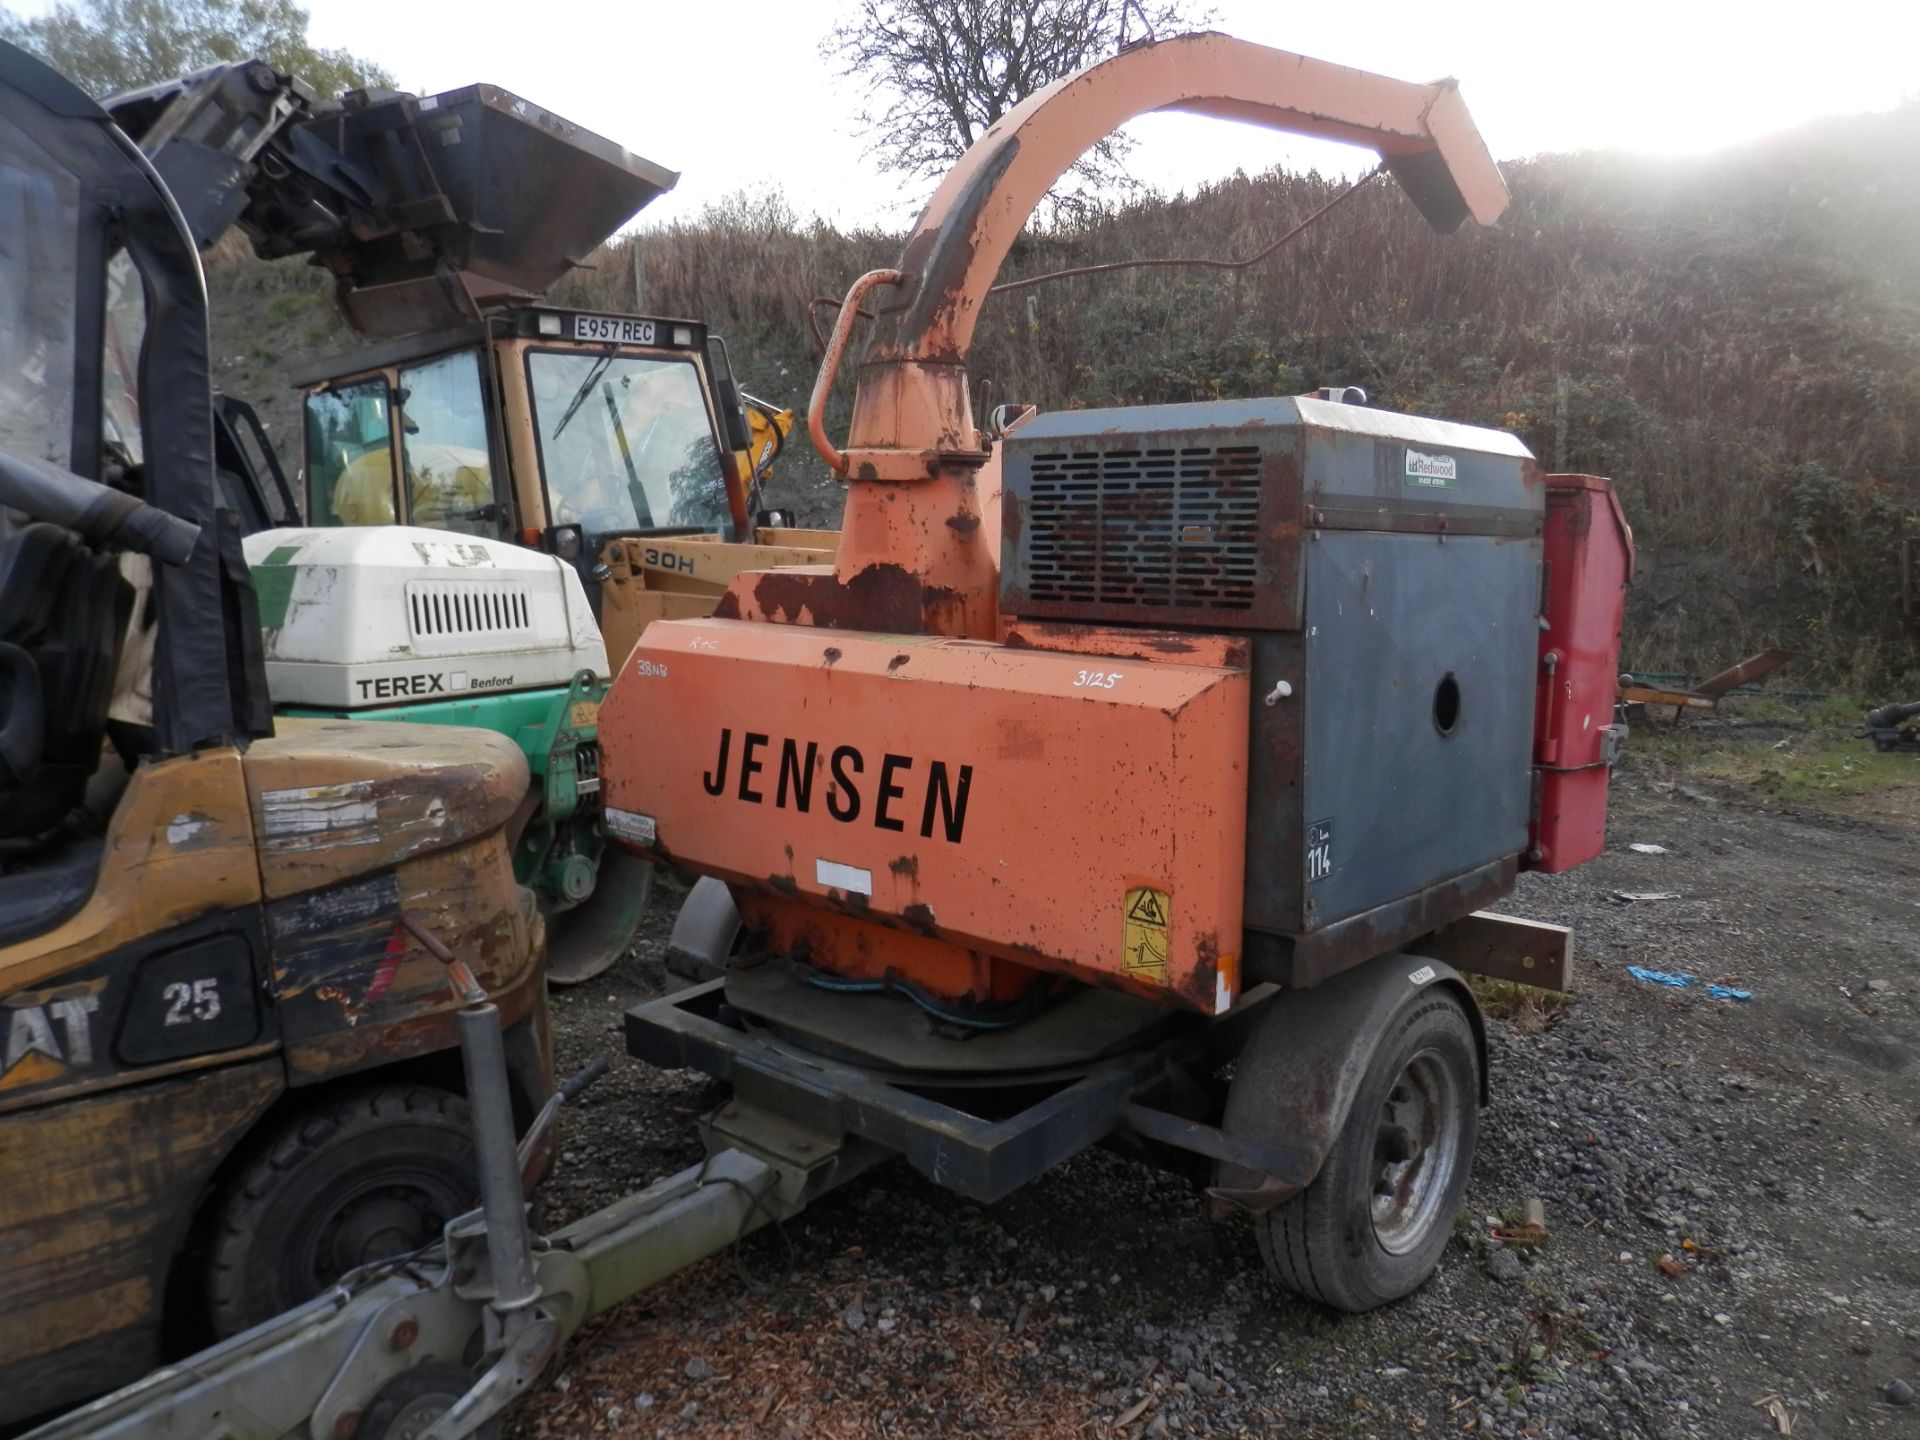 QUALITY 2004 JENSEN DIESEL TURNTABLE CHIPPER, GOOD WORKING ORDER - Image 7 of 8